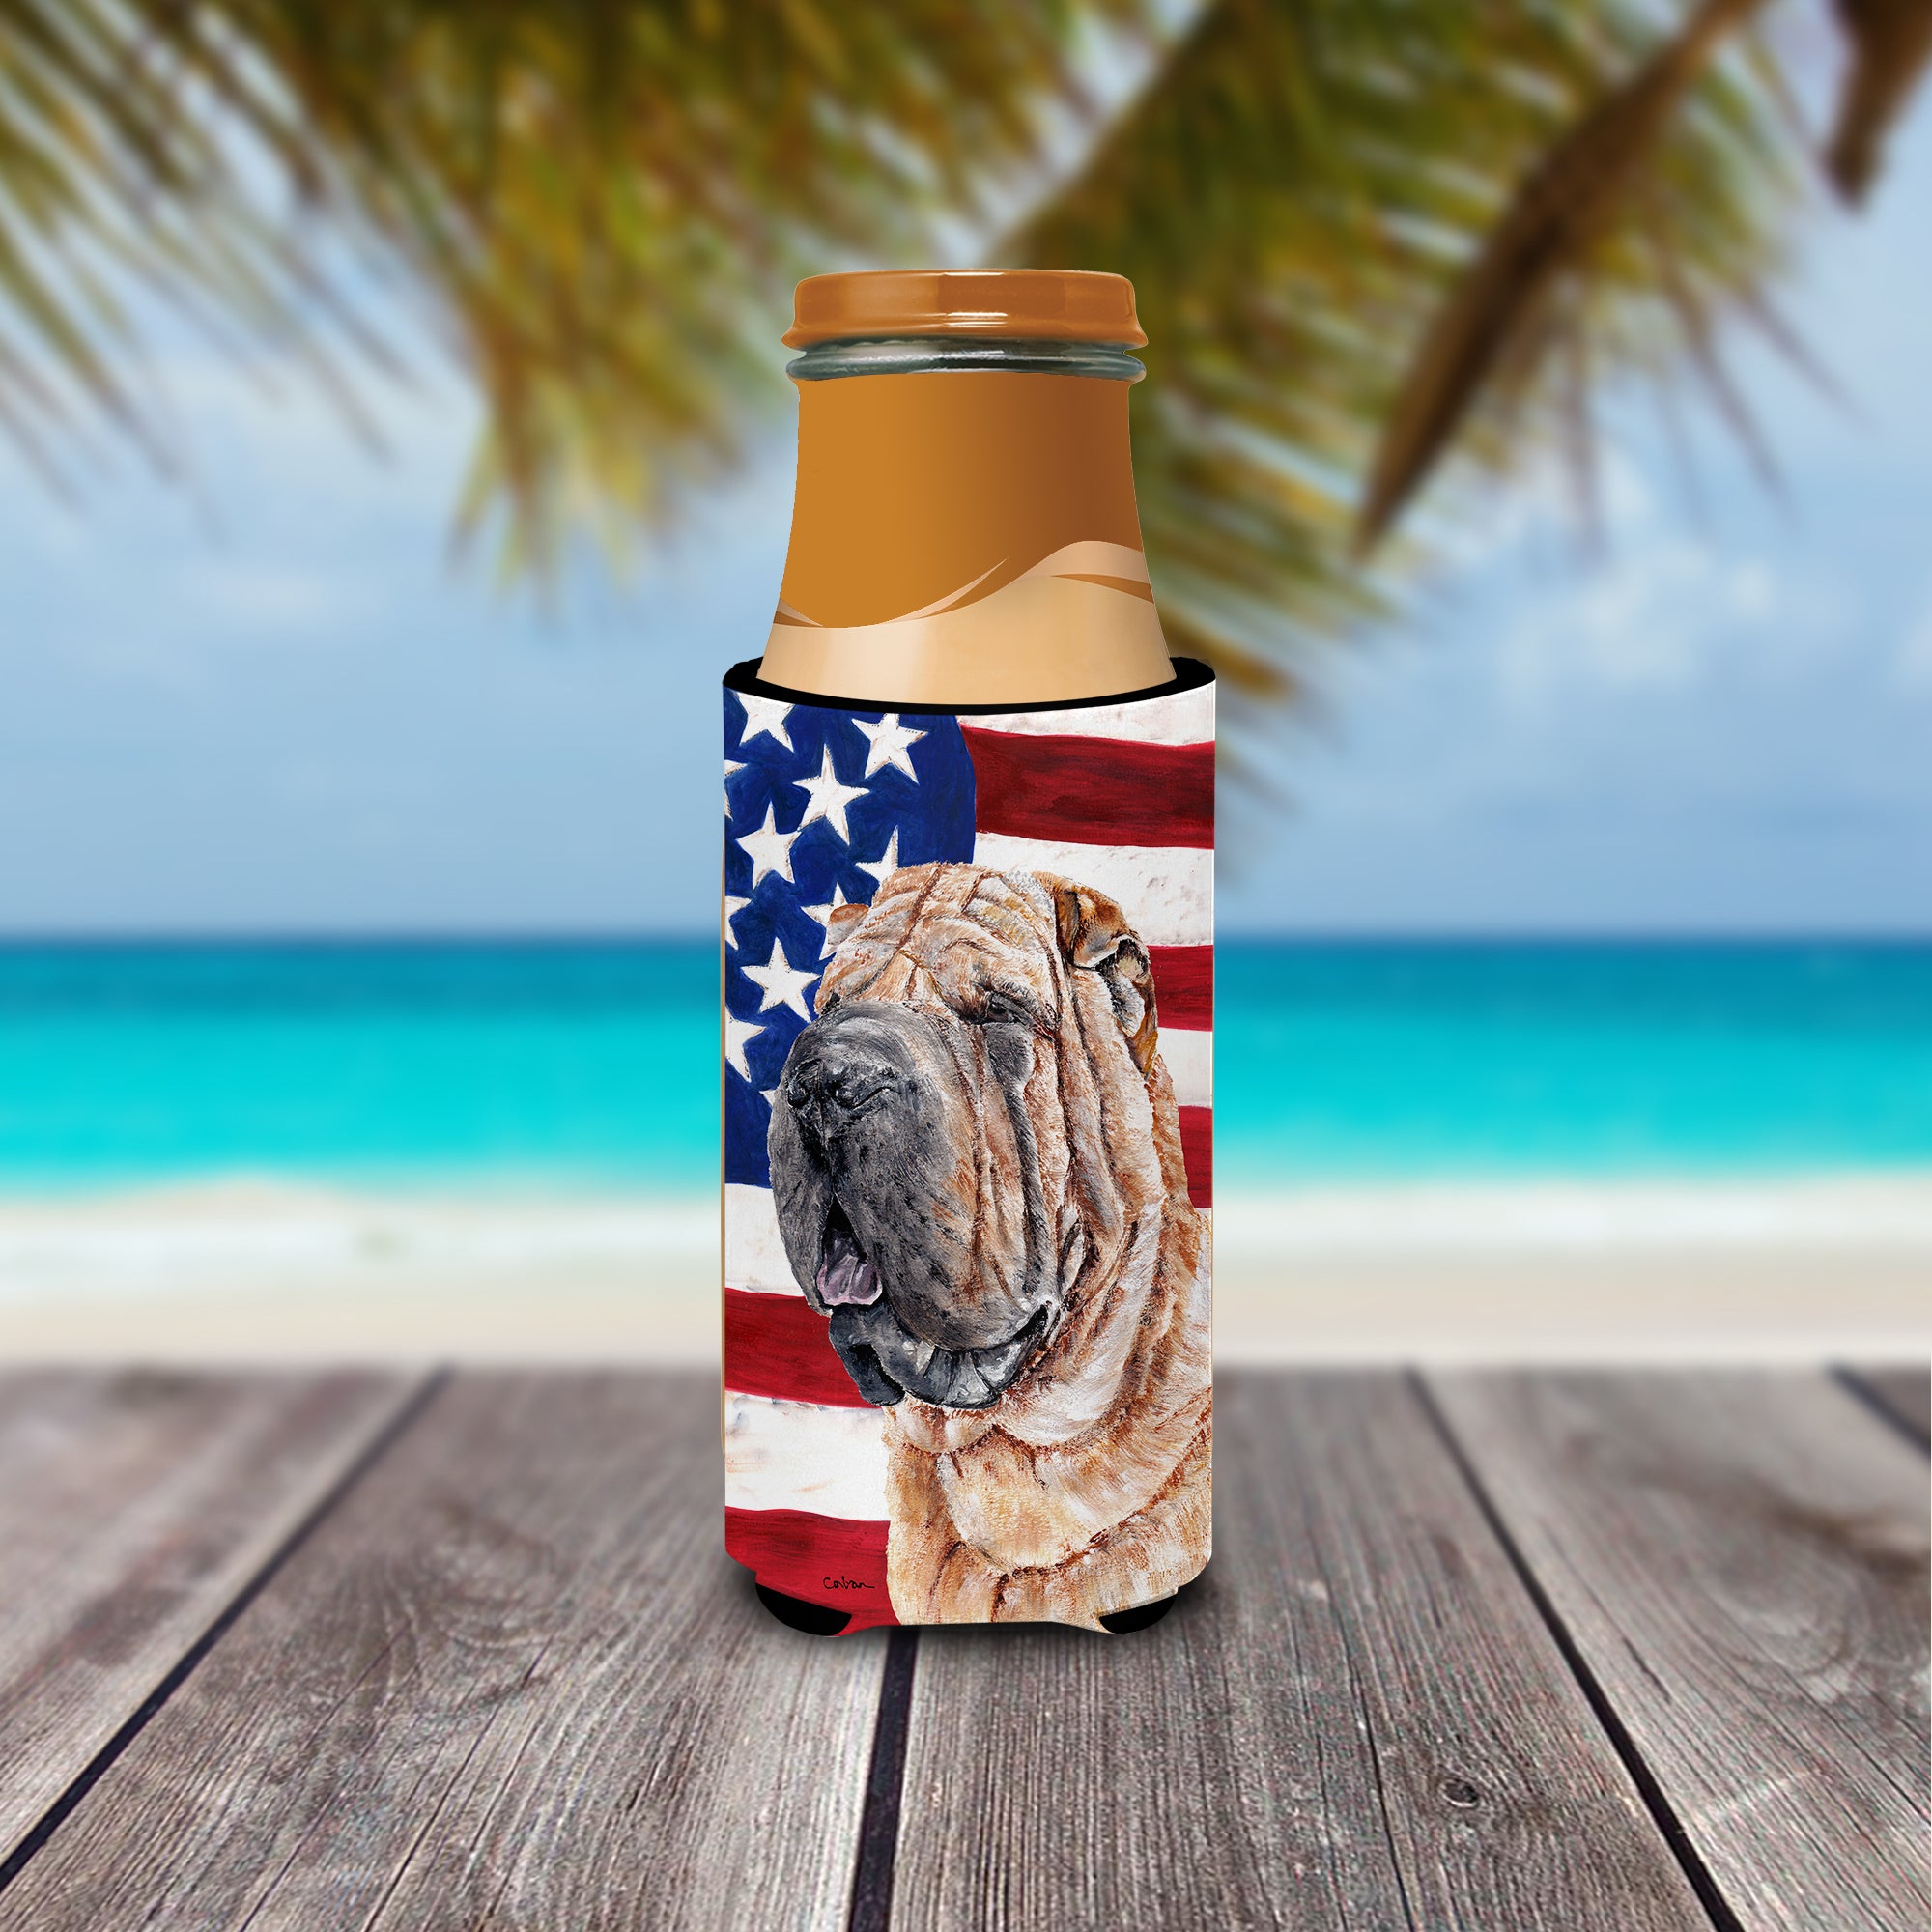 Shar Pei with American Flag USA Ultra Beverage Insulators for slim cans SC9623MUK.